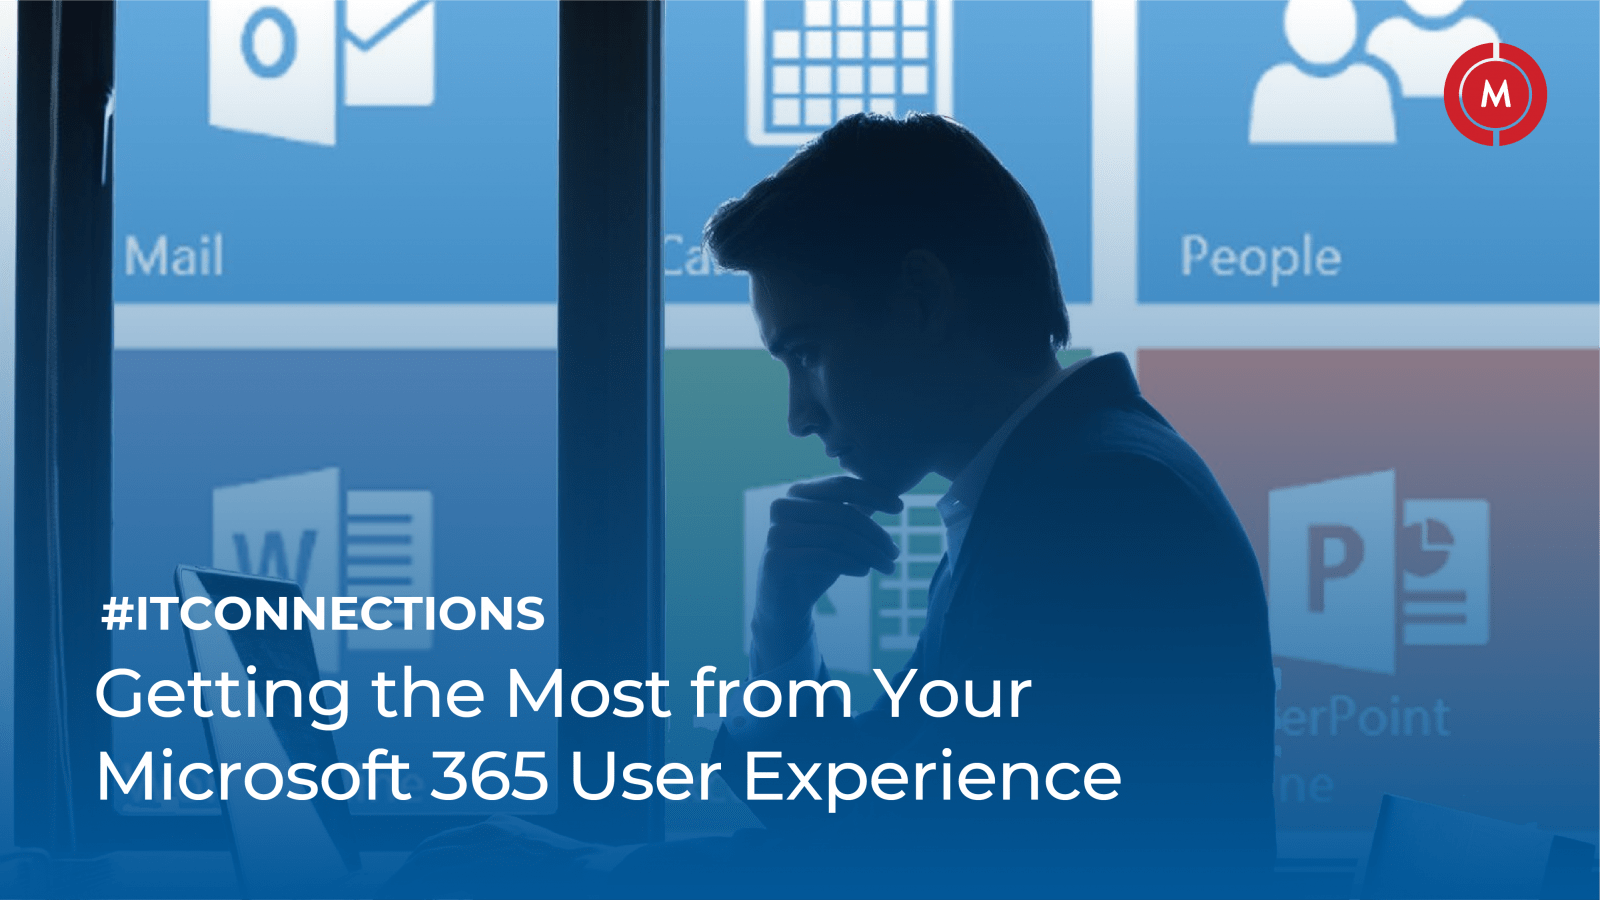 Getting the most from your Microsoft 365 user experience